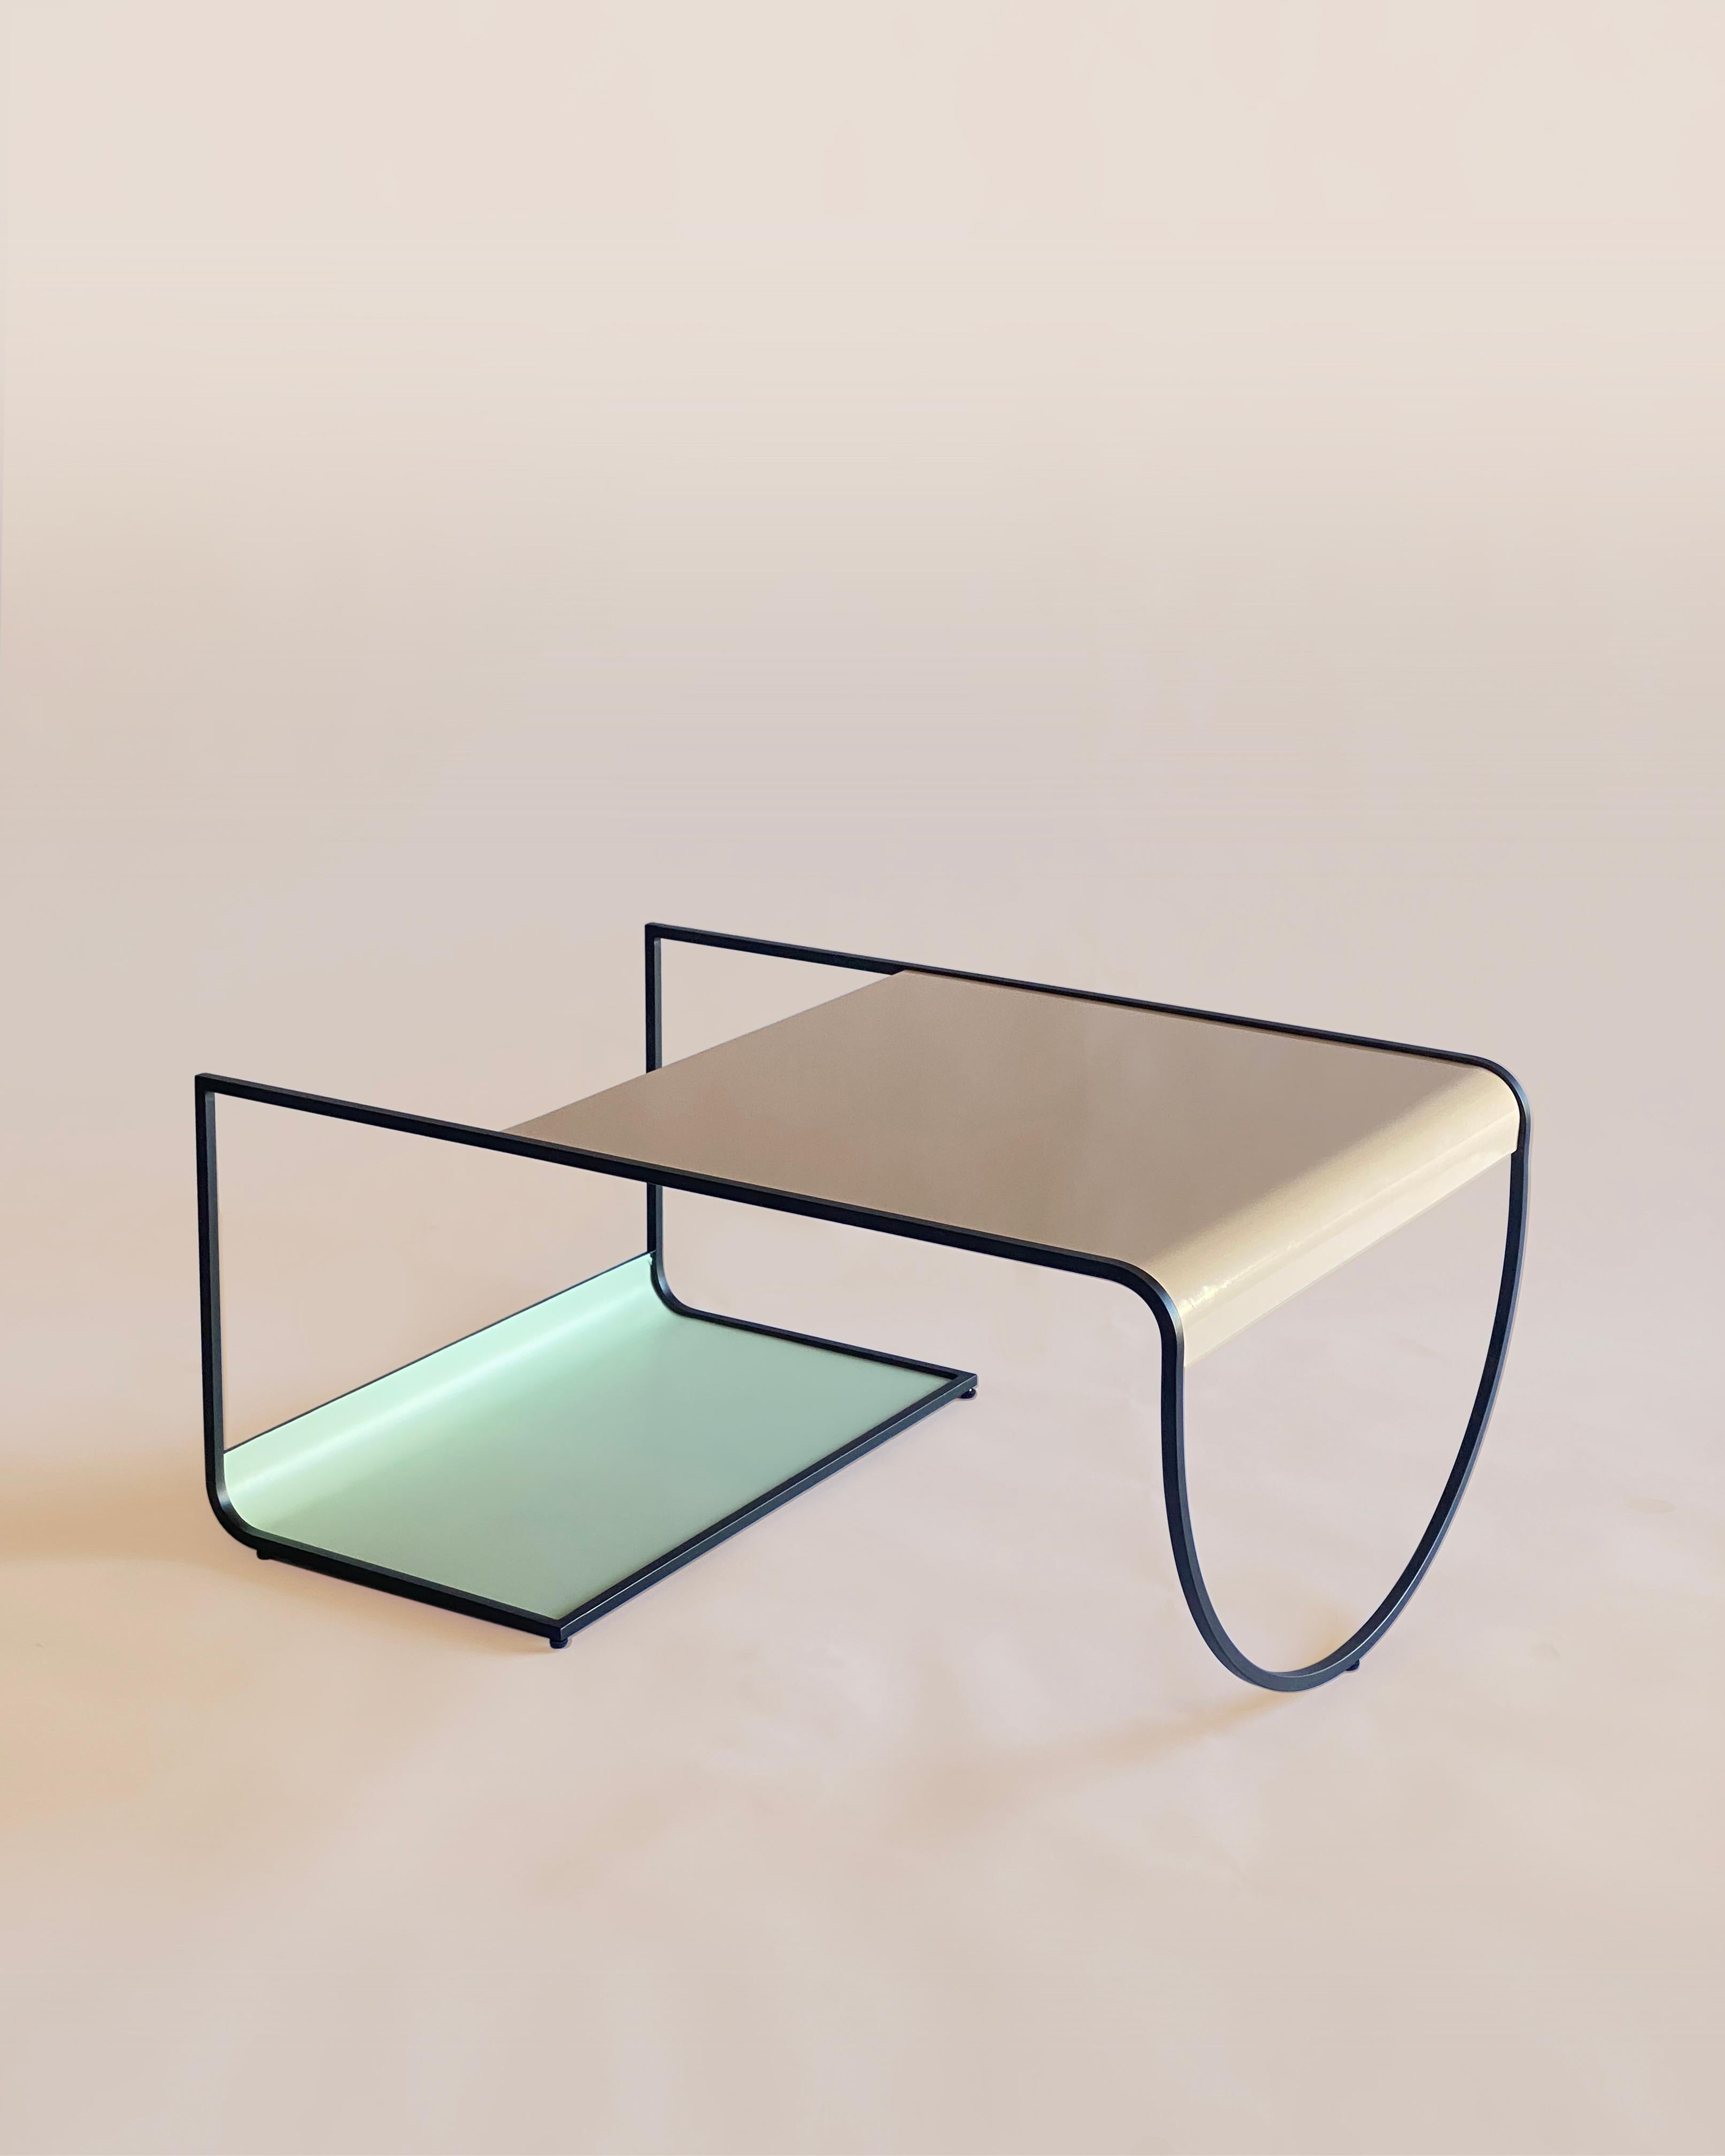 SW coffee table by Soft-geometry
Materials: Steel
Dimensions: 36 x 24.5 x 17” H

Simple, playful geometries form the light and fluid sw geometric coffee table in powder coated steel. Perched on an arched-belly base on one side and a rolled rack